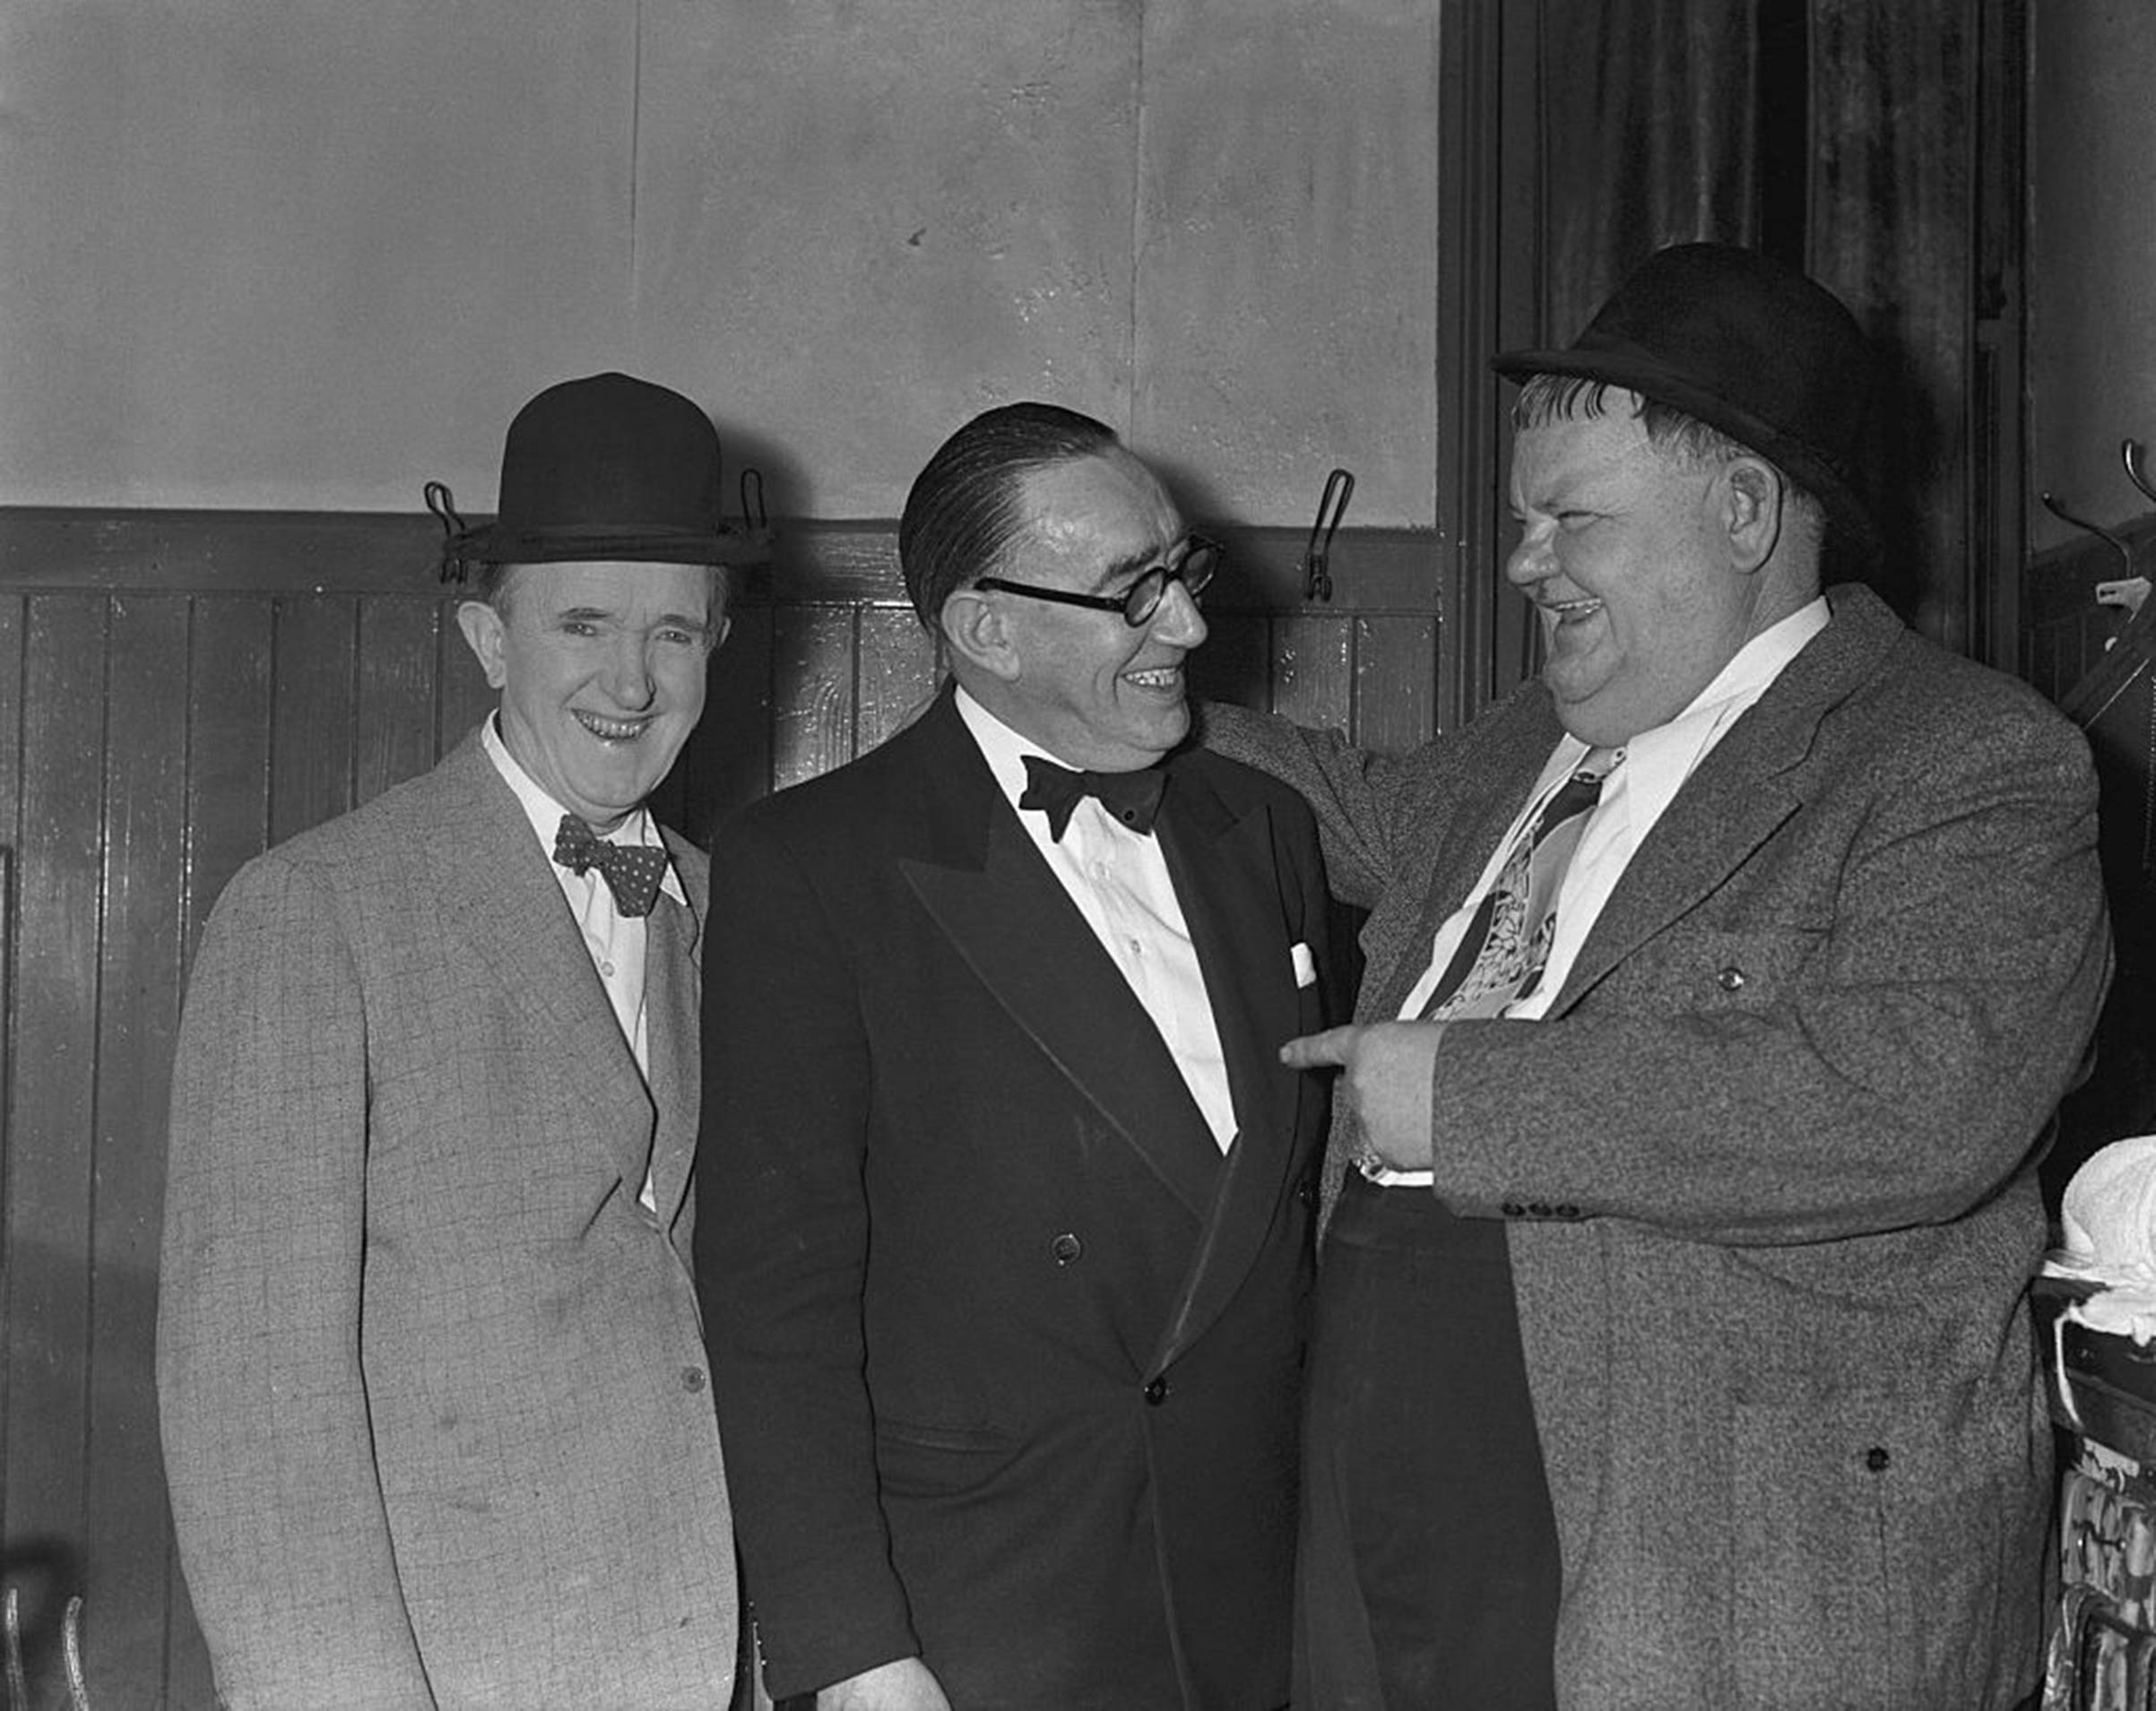 Stan Laurel (left) and Oliver Hardy (right) shortly after performing at the Empire theater in Nottingham, England, in Aug. 1953 during their U.K. tour. (Montifraulo Collection—Getty Images)